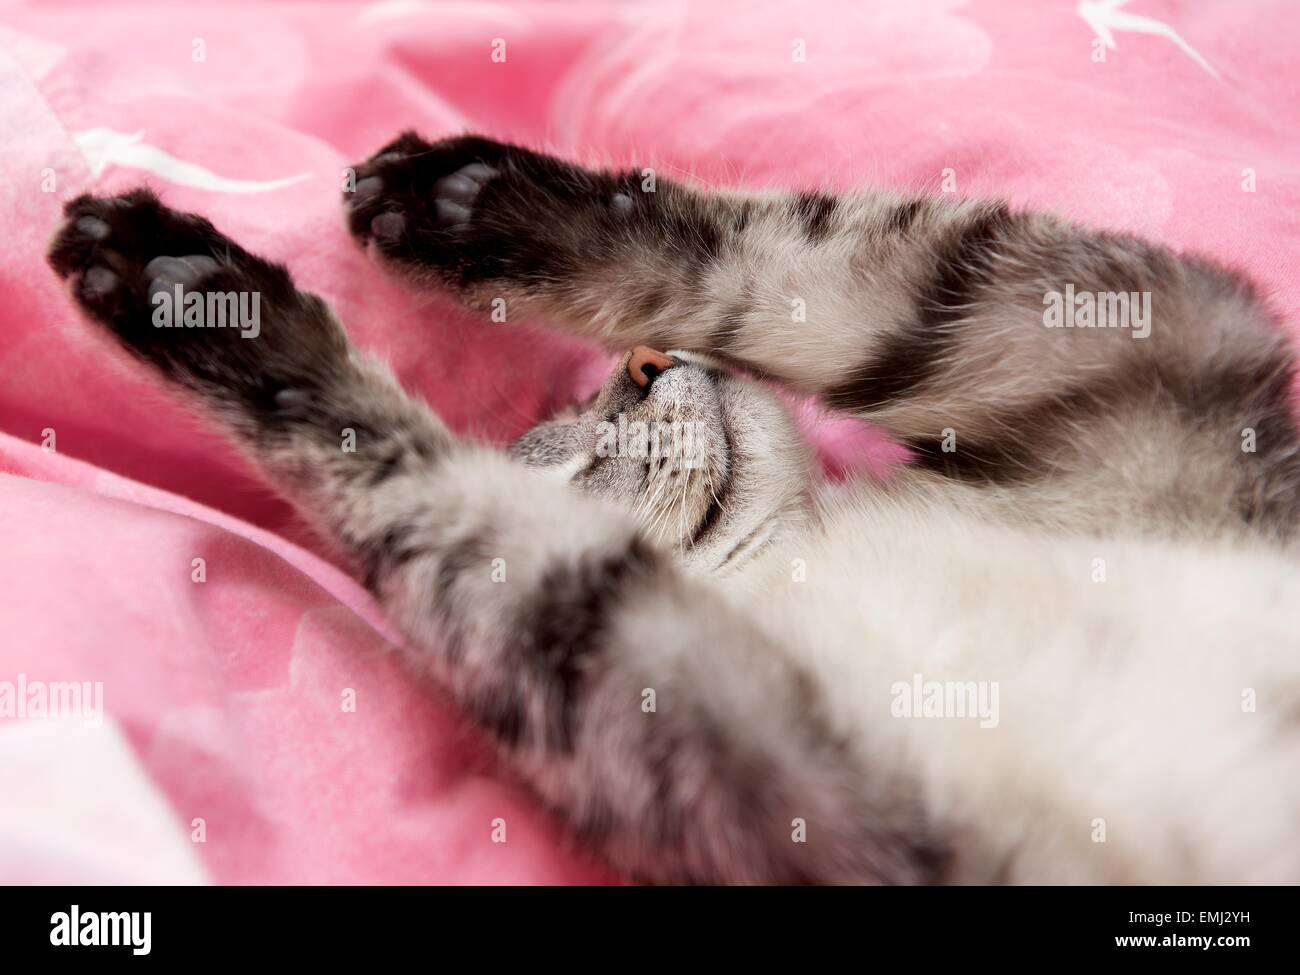 cat in bed, funny sleeping cat, cat close up, domestic cat sleeping in bed Stock Photo